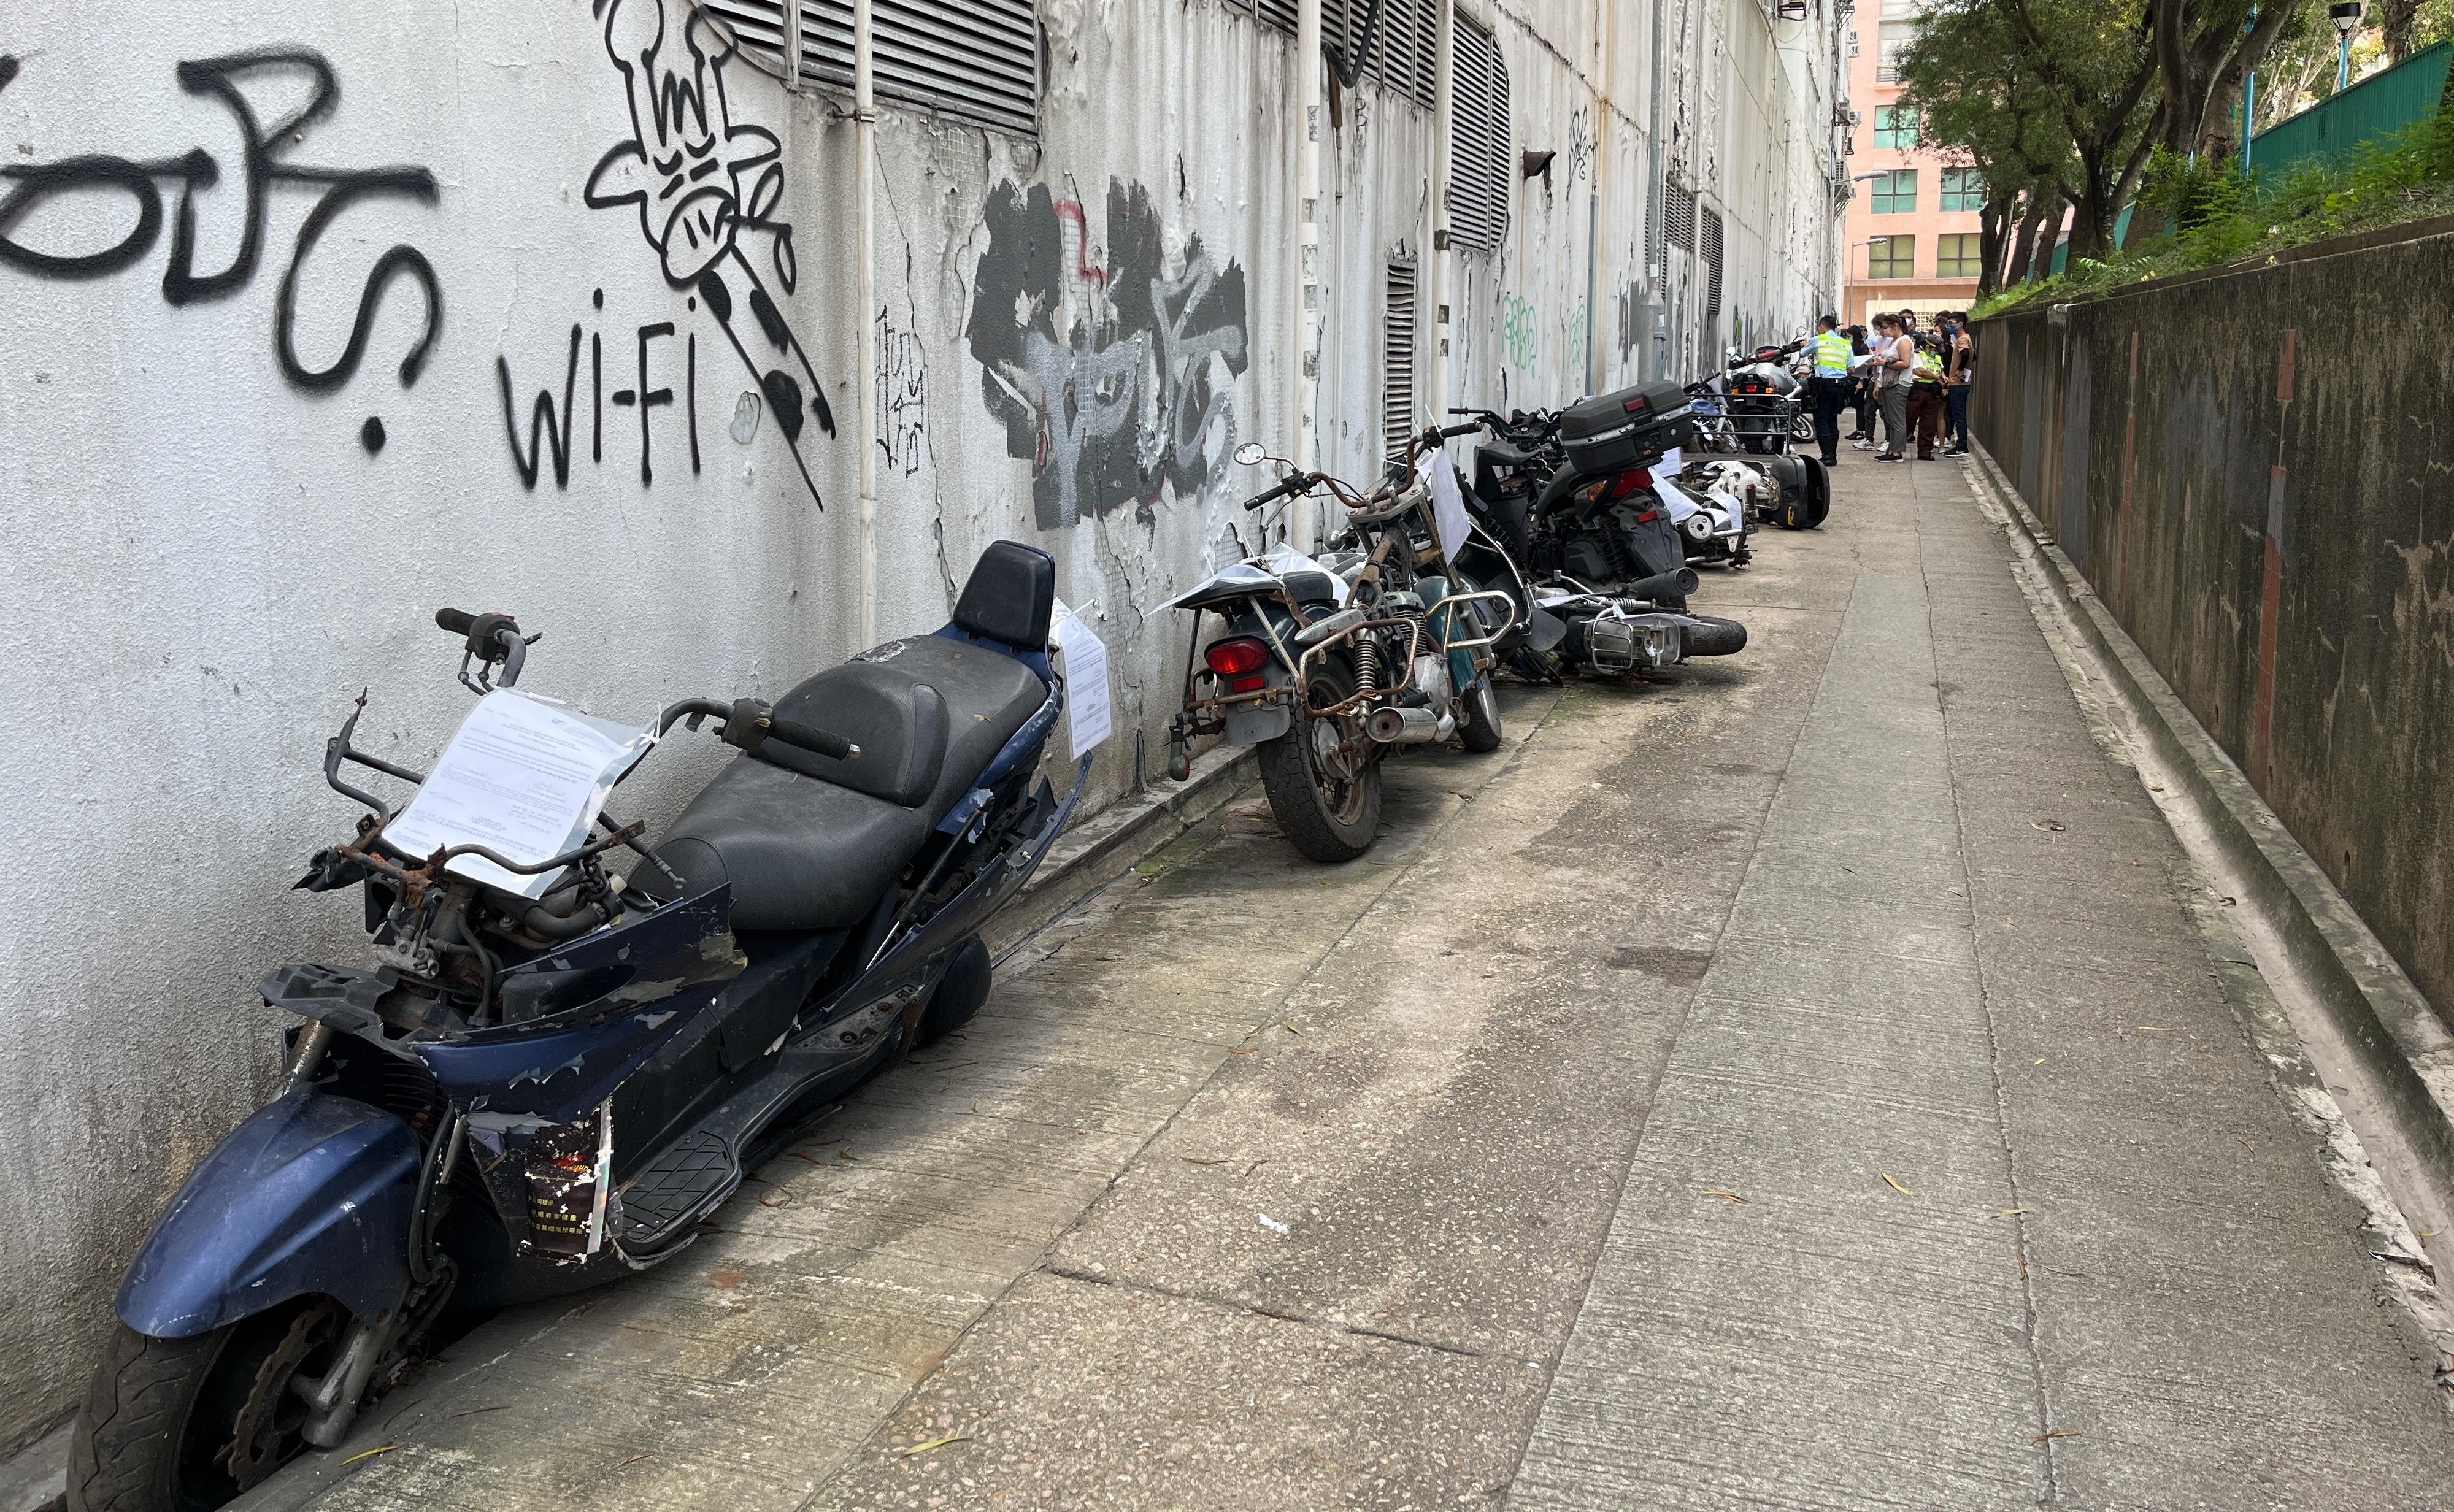 The Home Affairs Department and its District Offices conducted a series of cleaning works, publicity and educational activities during July and September to support the Government Programme on Tackling Hygiene Black Spots launched under the District Matters Co-ordination Task Force. Photo shows a back alley in Kowloon City before the joint operation for removal of abandoned vehicles co-ordinated by the Kowloon City District Office and relevant departments.